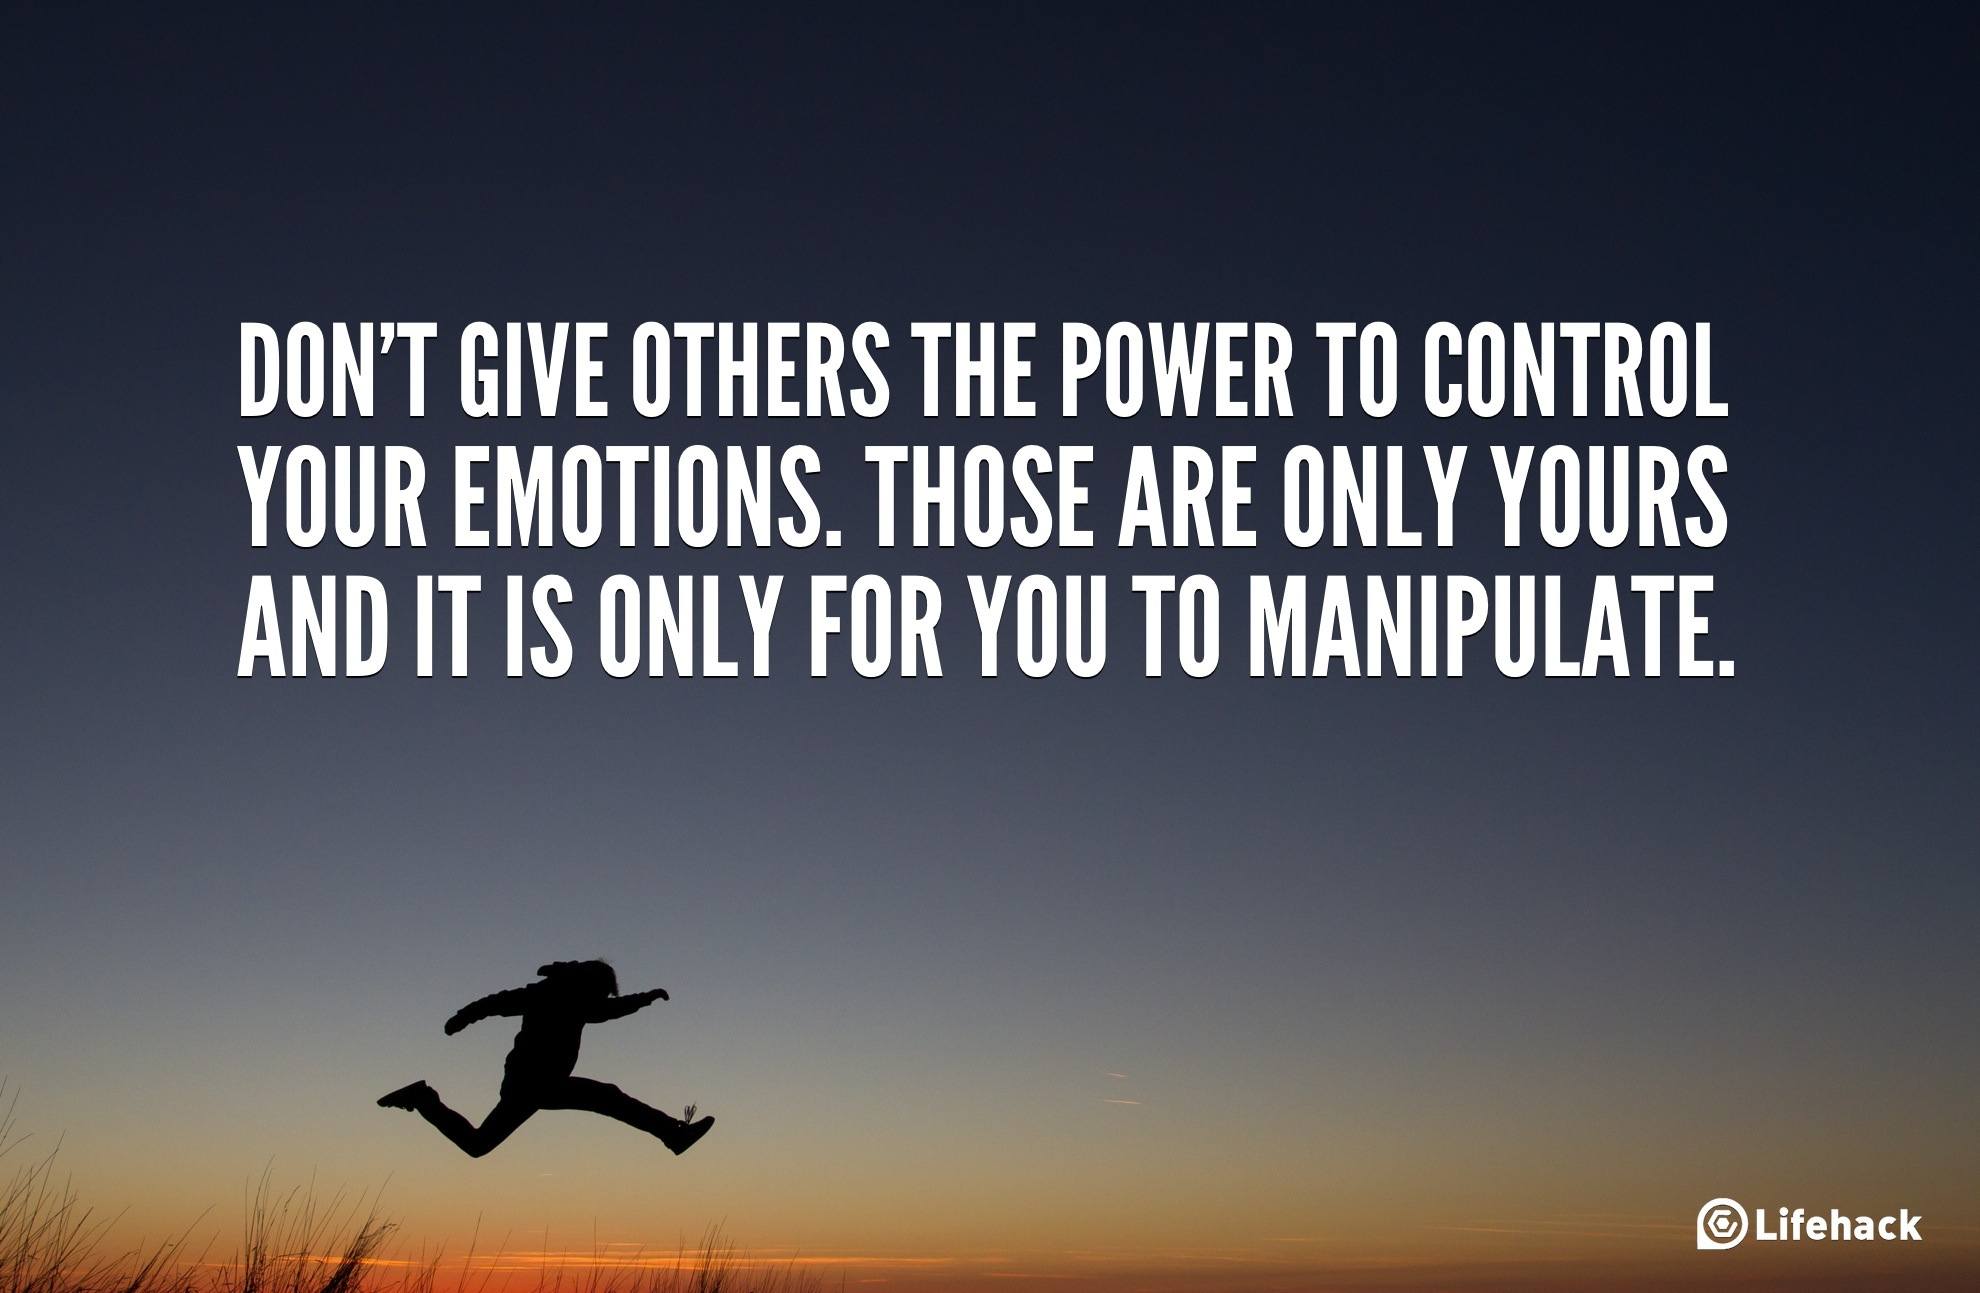 Dont-give-others-the-power-to-control-your-emotions.-Those-are-only-yours-and-it-is-only-for-you-to-manipulate.